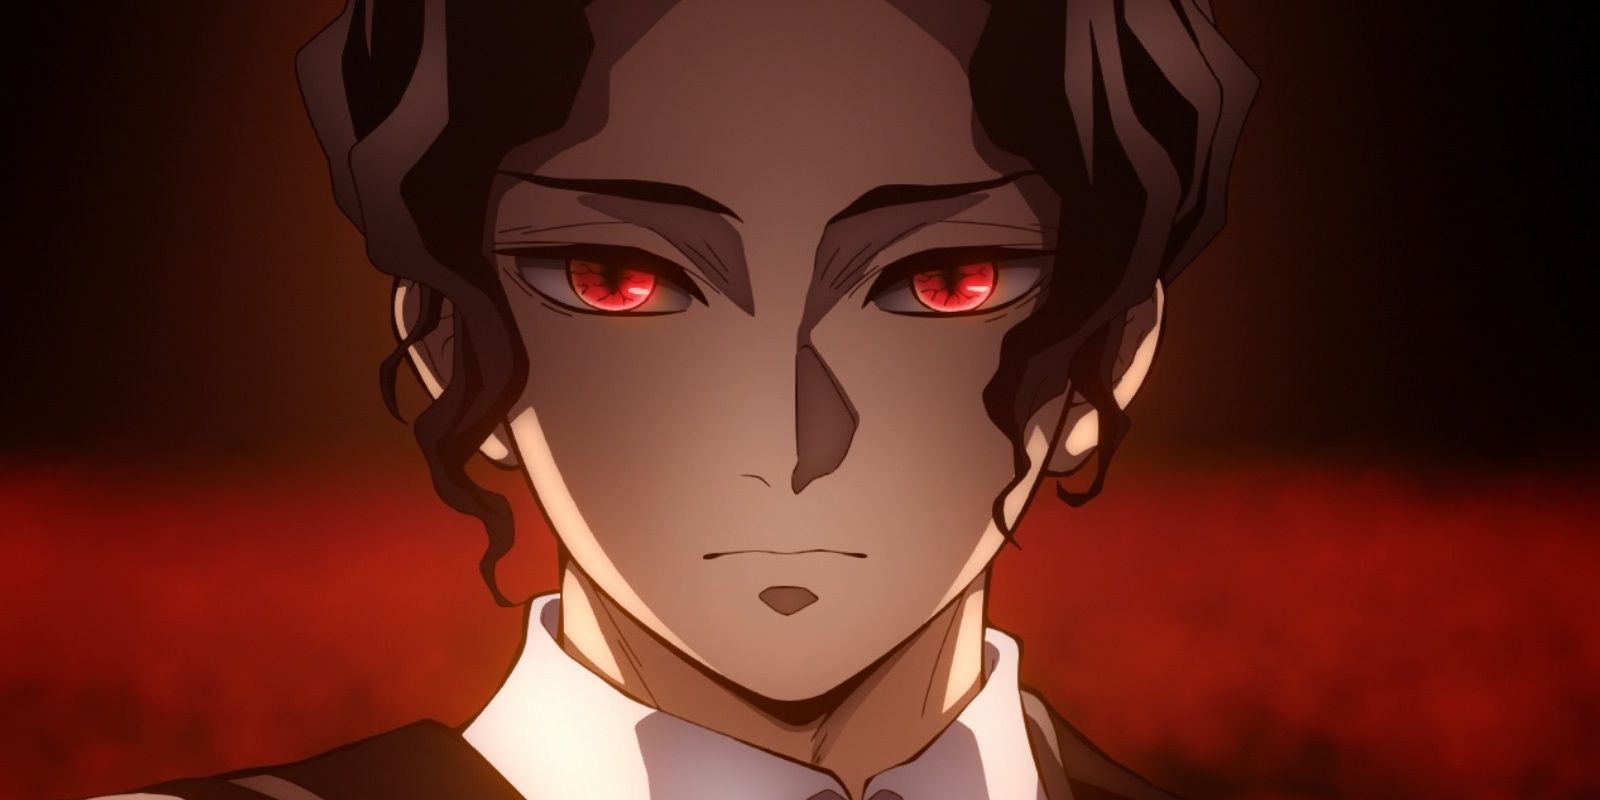 Muzan Kibutsuji in a suit with red lighting in Demon Slayer